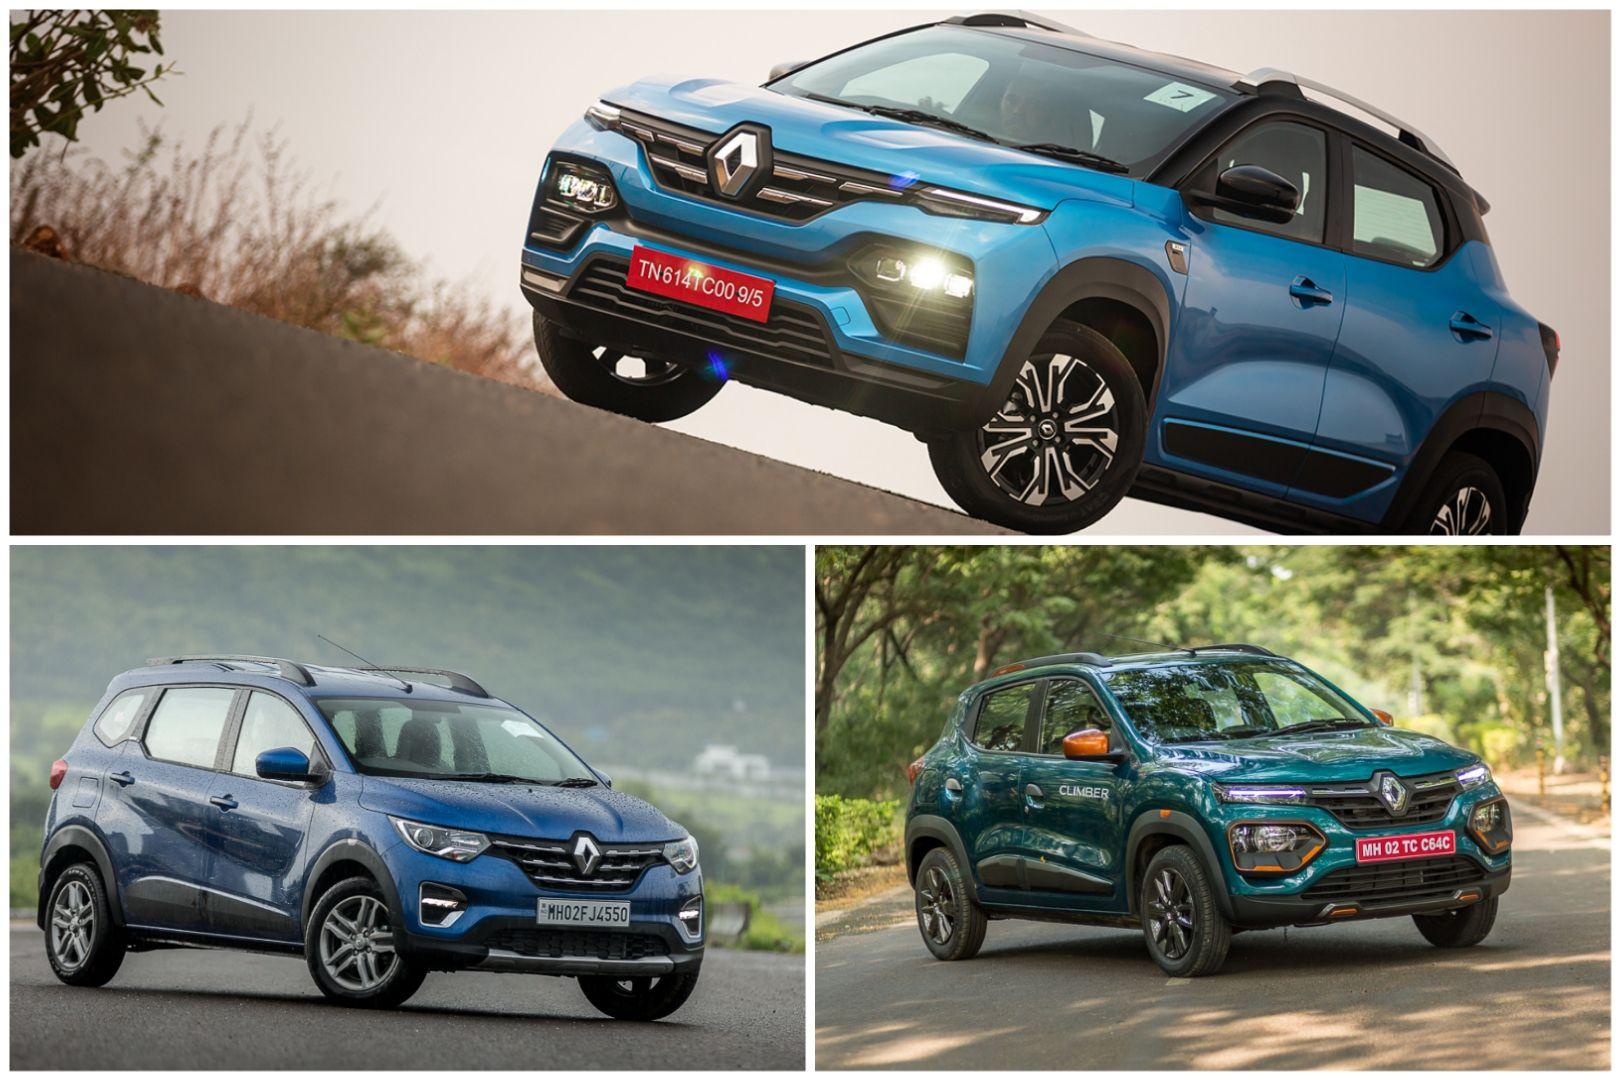 Get Year-end Savings of Rs 77,000 On Renault Cars This December